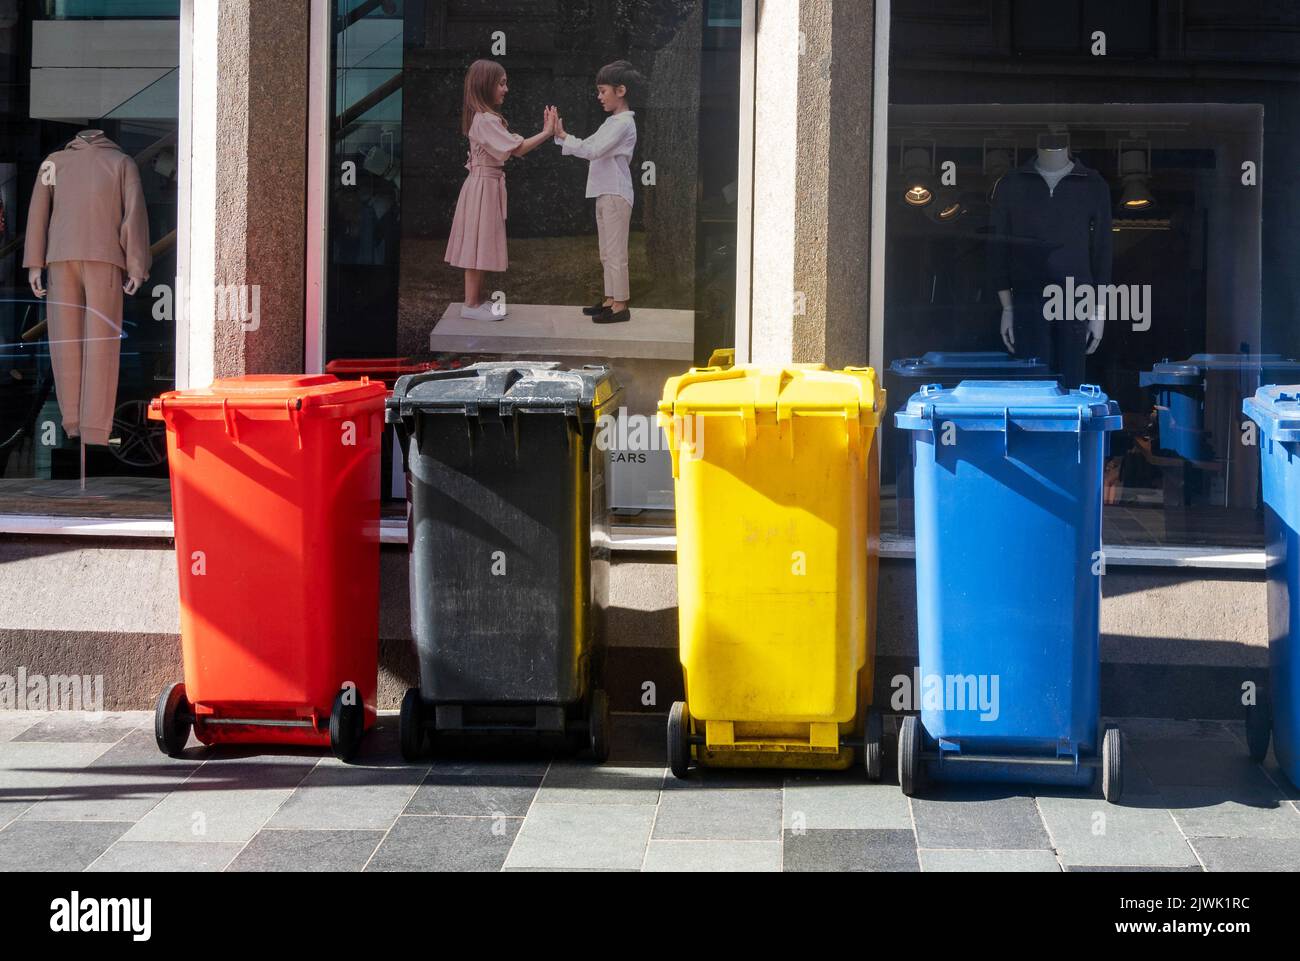 Red, black, yellow, and blue trash bins in Liverpool Stock Photo